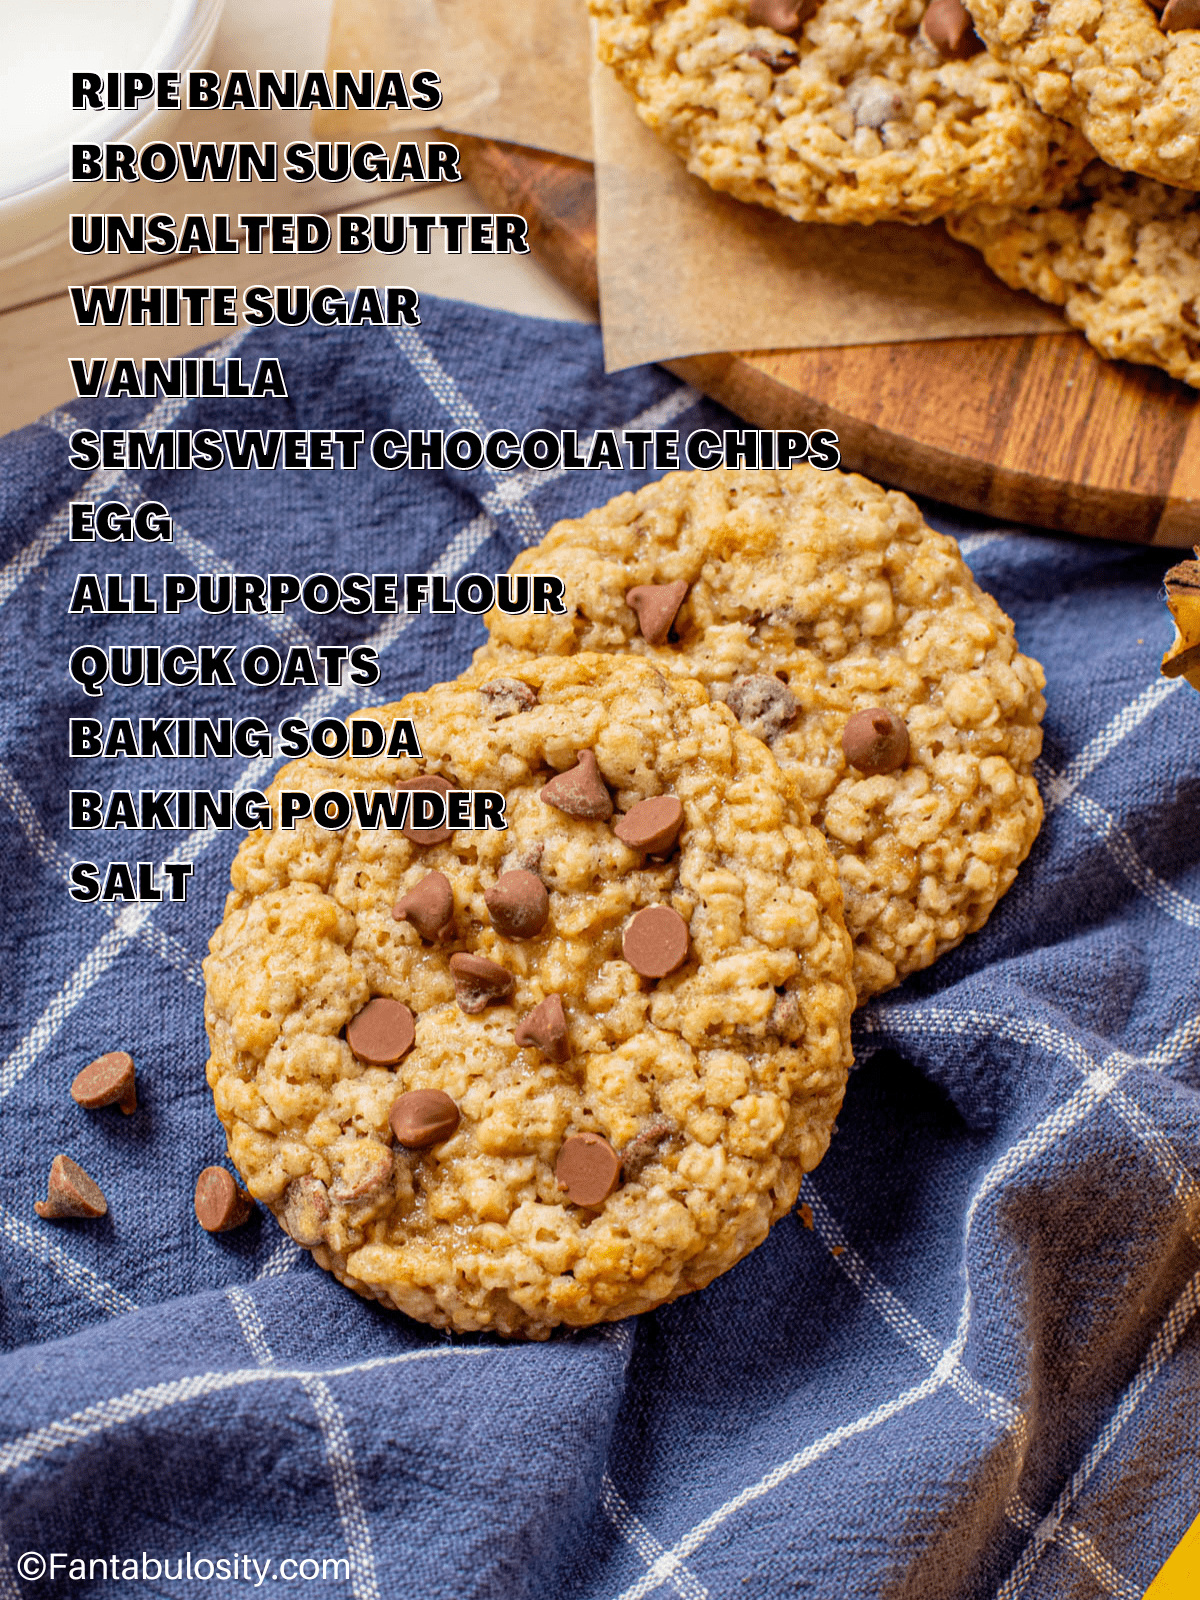 A picture of two banana chocolate chip cookies with a list of the ingredients for the recipe overlayed on the image.